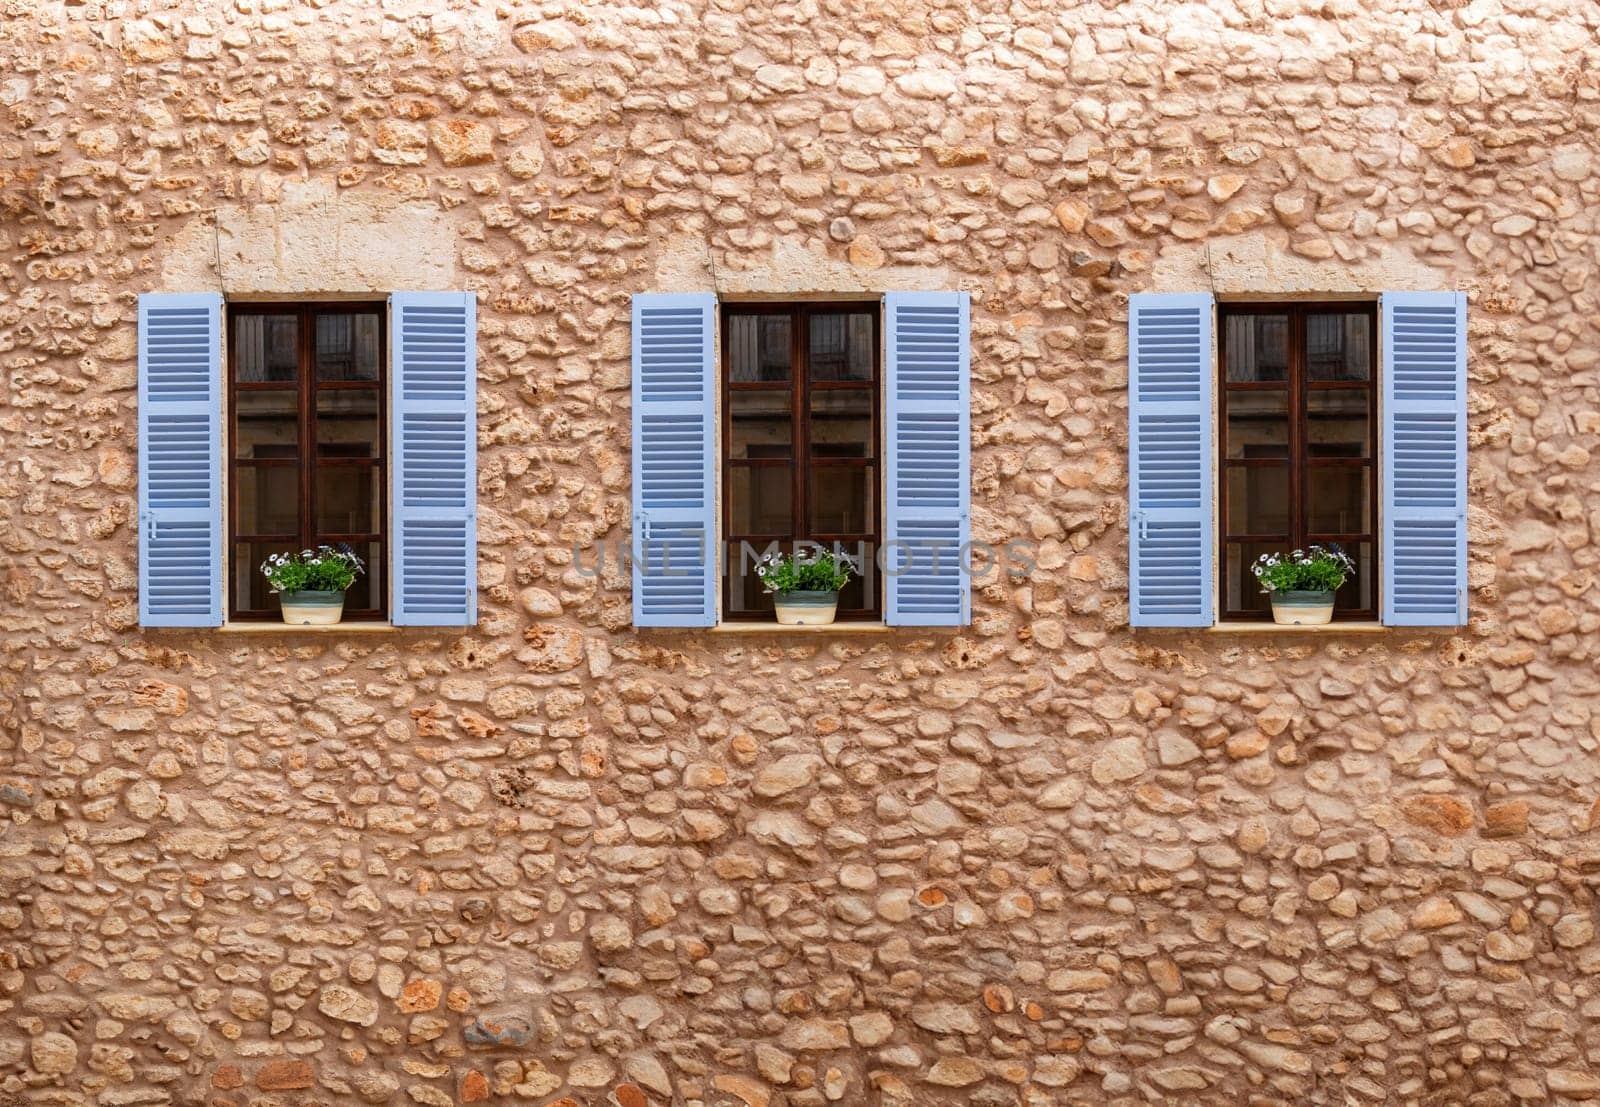 Symmetry in Stonework: Trio of Blue Shutters on a Textured Wall by Juanjo39